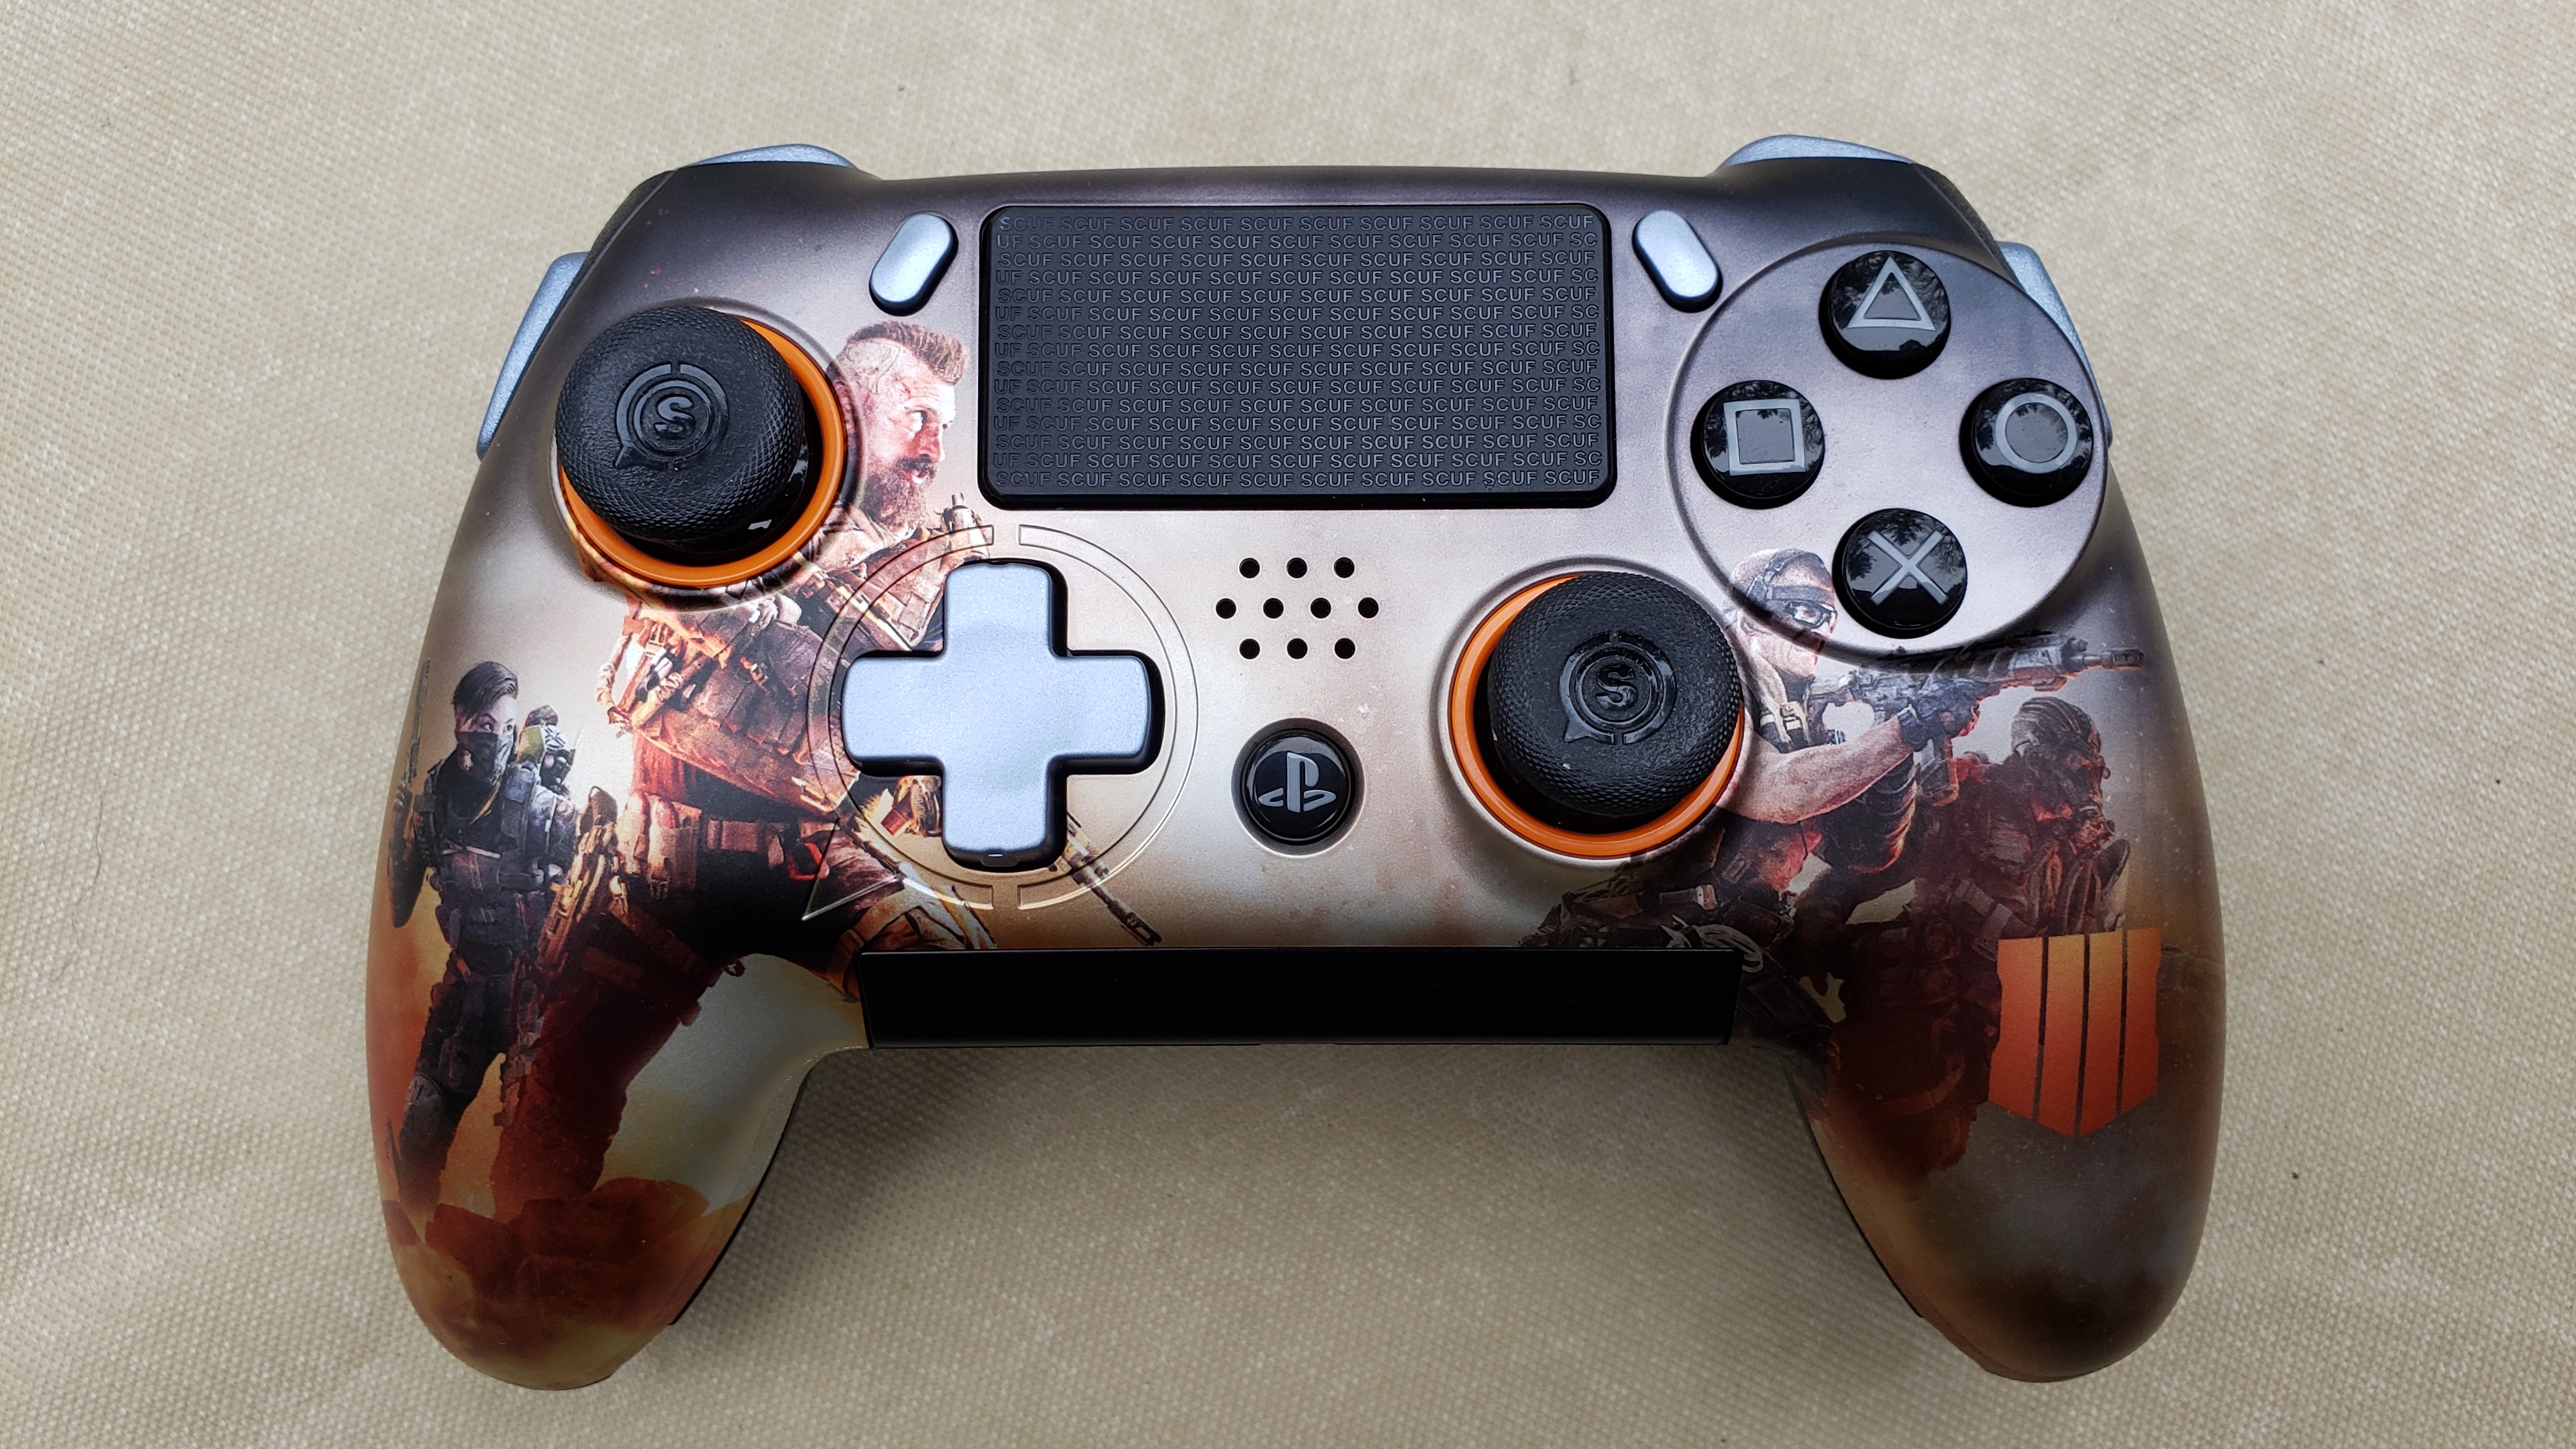 scuf vantage custom ps4 wired controller